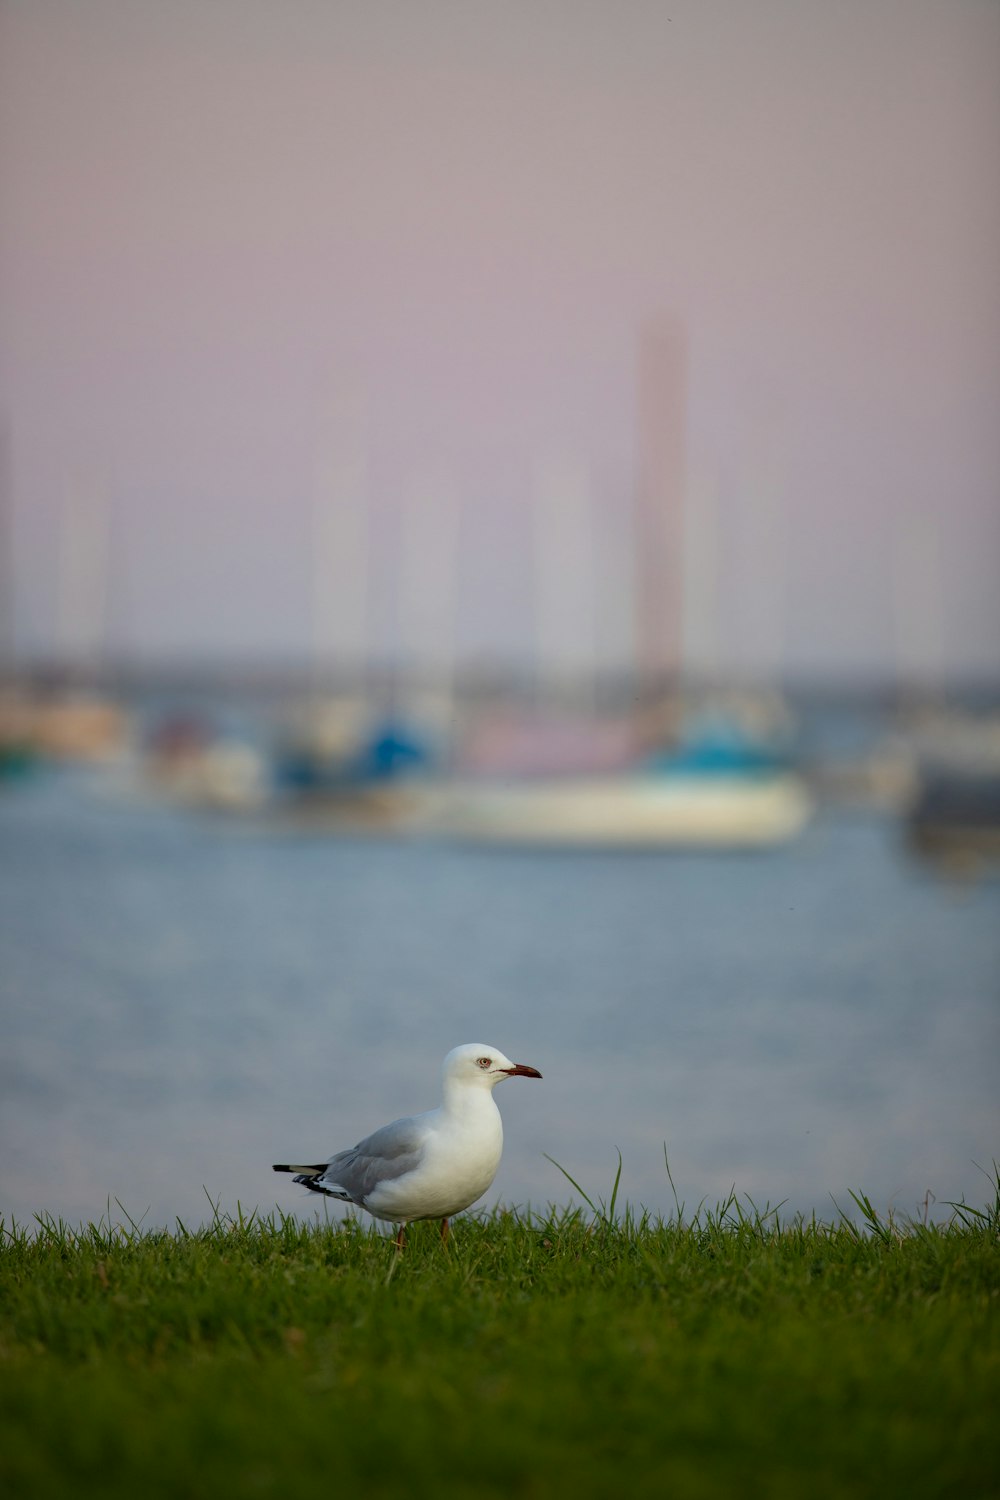 a seagull on a grassy field